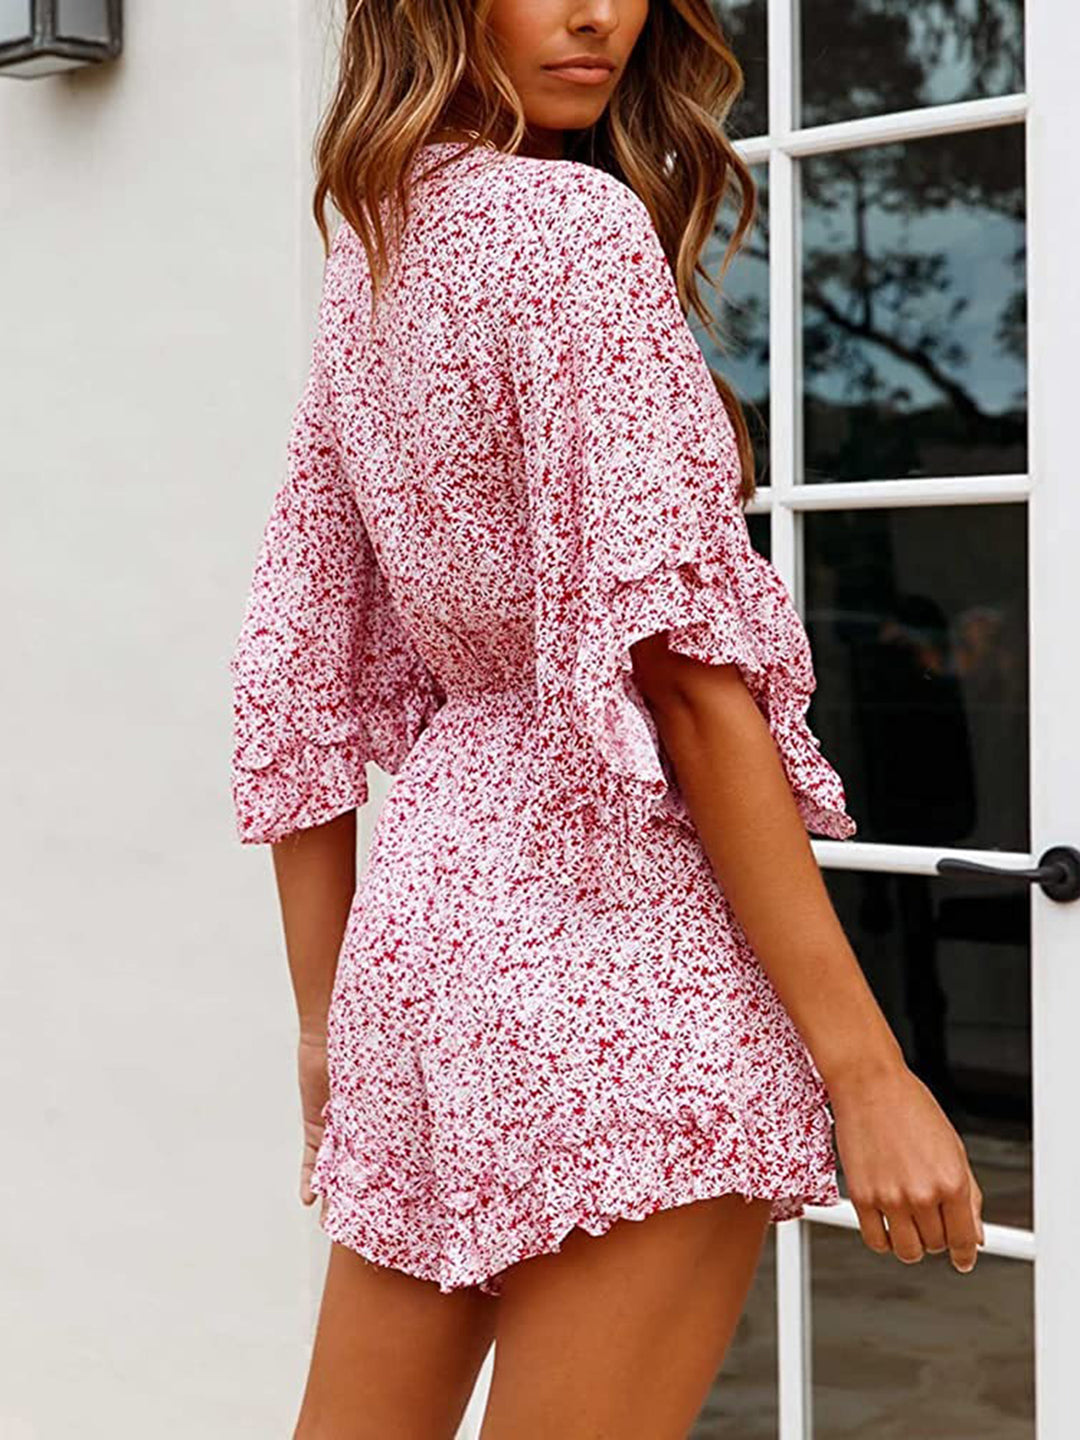 Womens Rompers Baggy Sleeve Jumpsuits Floral Print V Neck Elastic Waist Tie Front Playsuit Ruffle Short Dresses